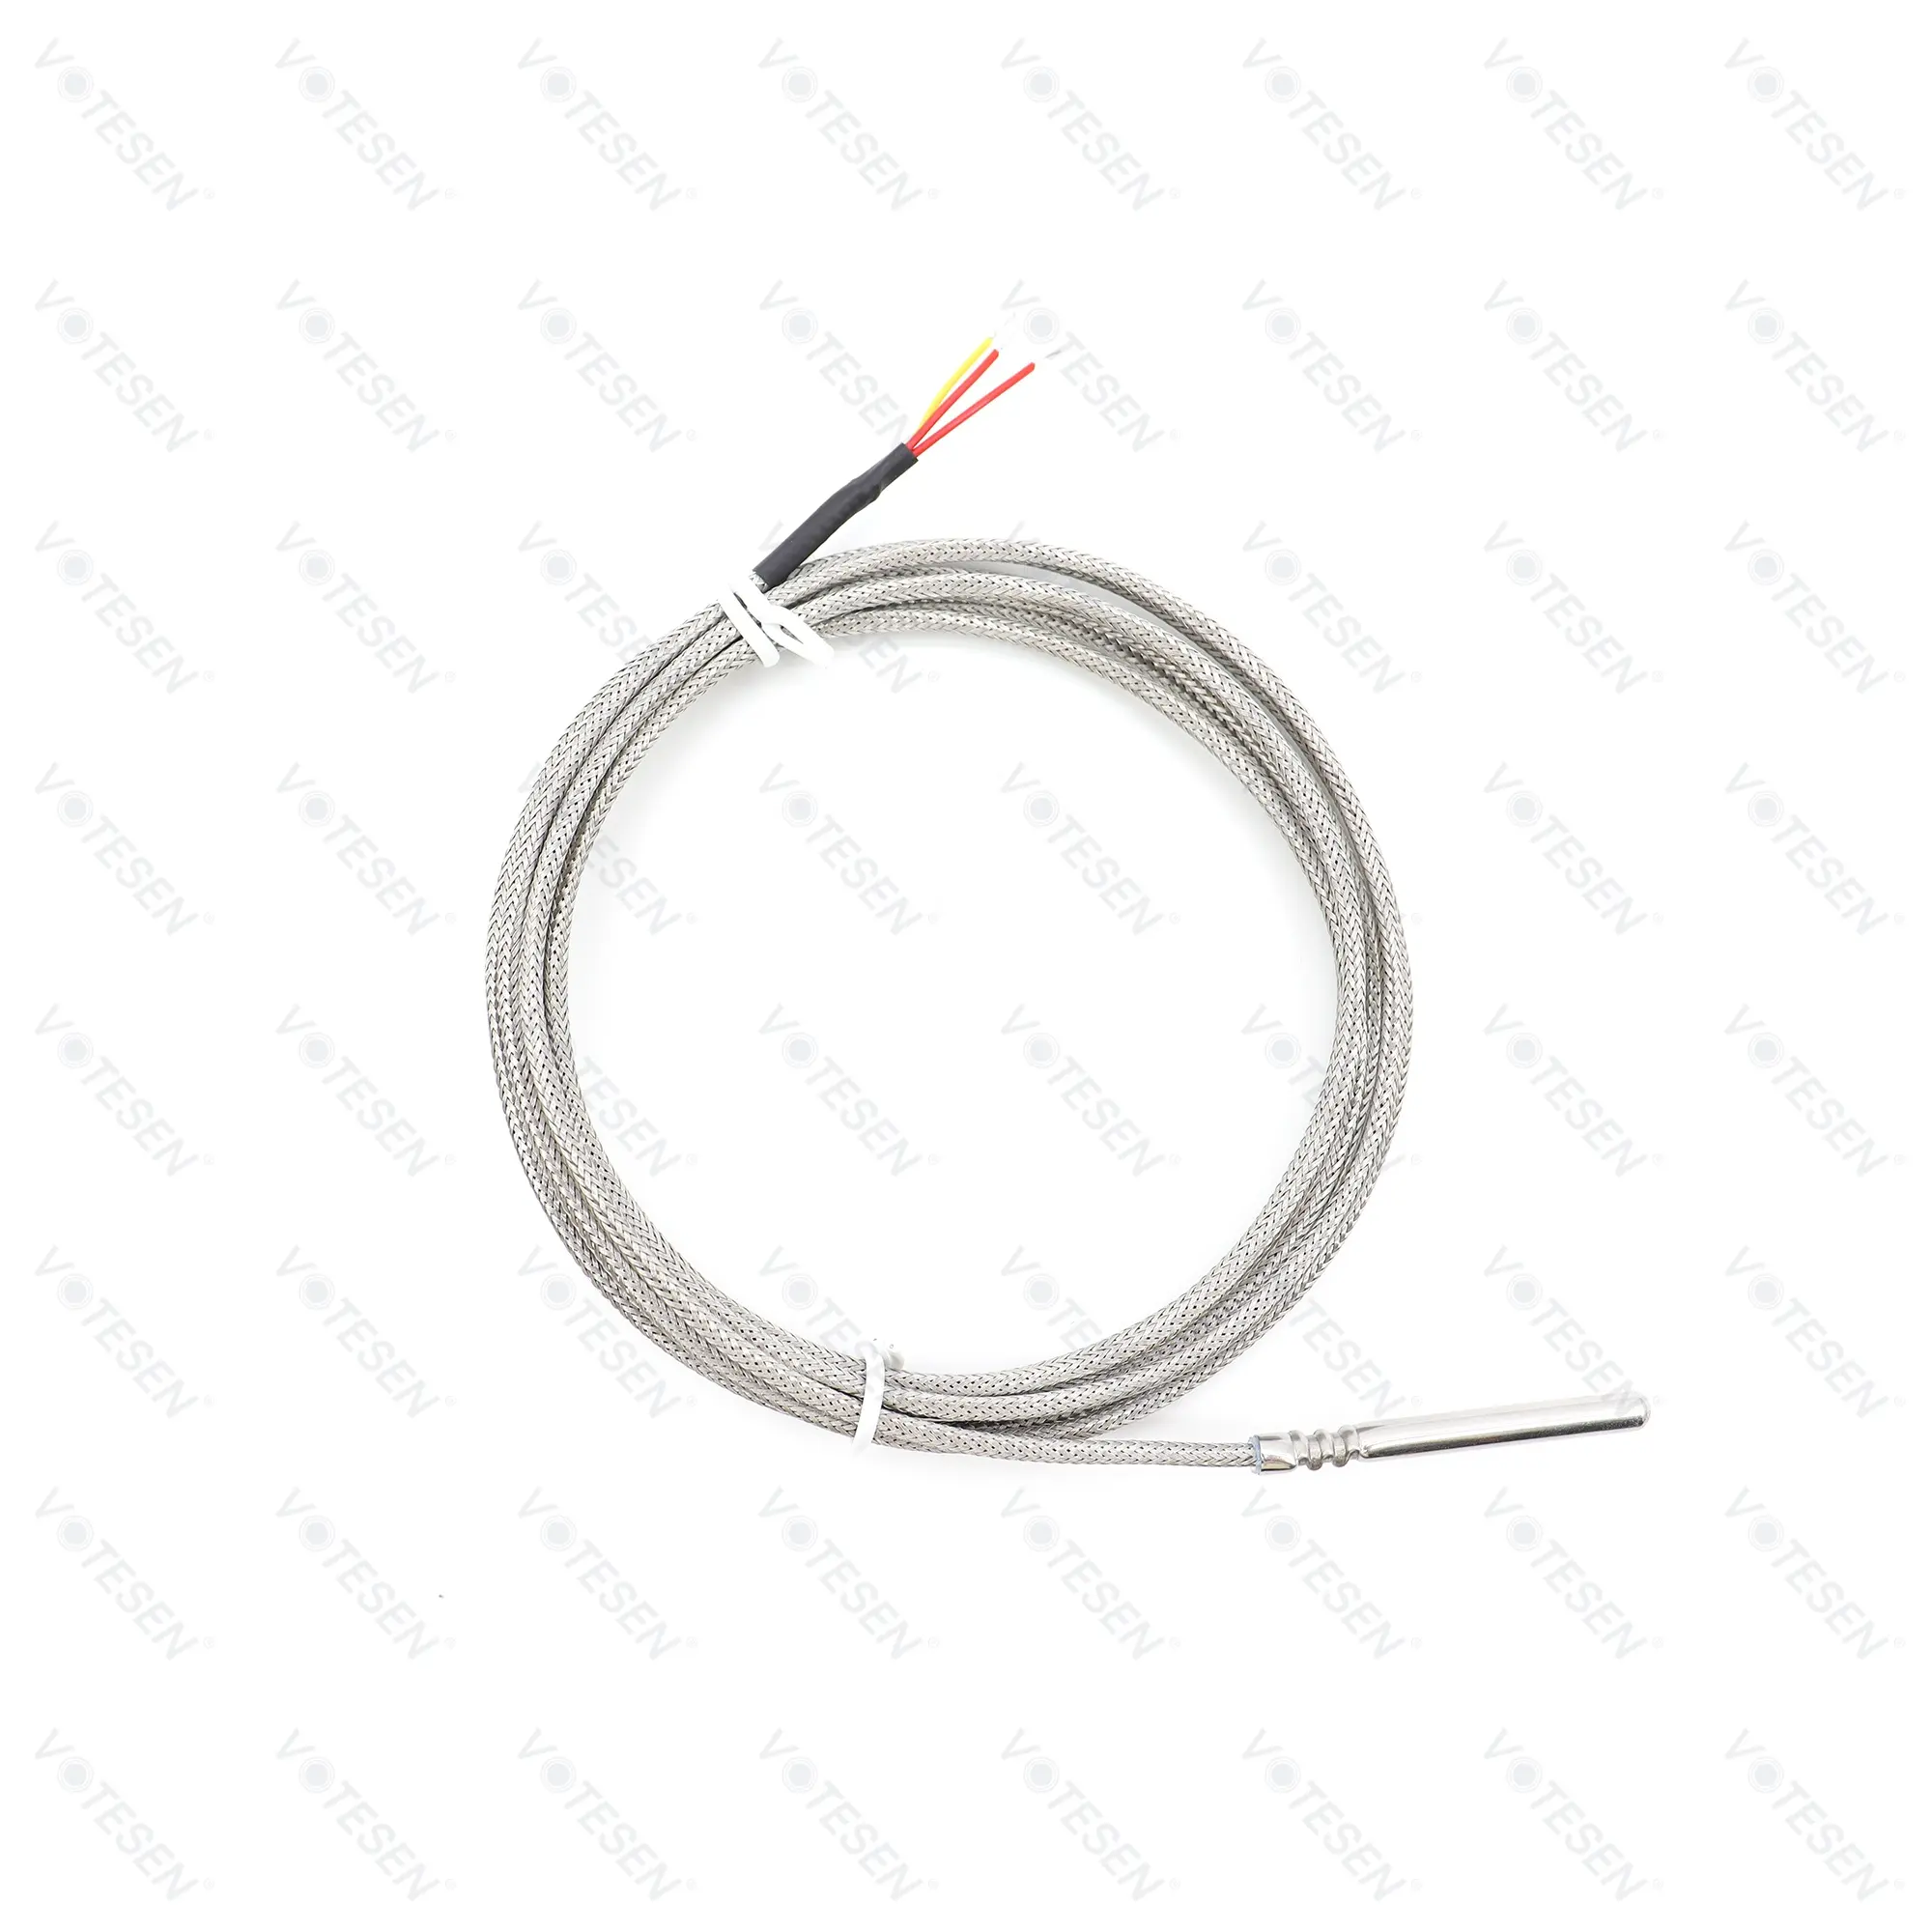 Class A PT100 Temperature Sensor Steel Braided Cable Ready Stock